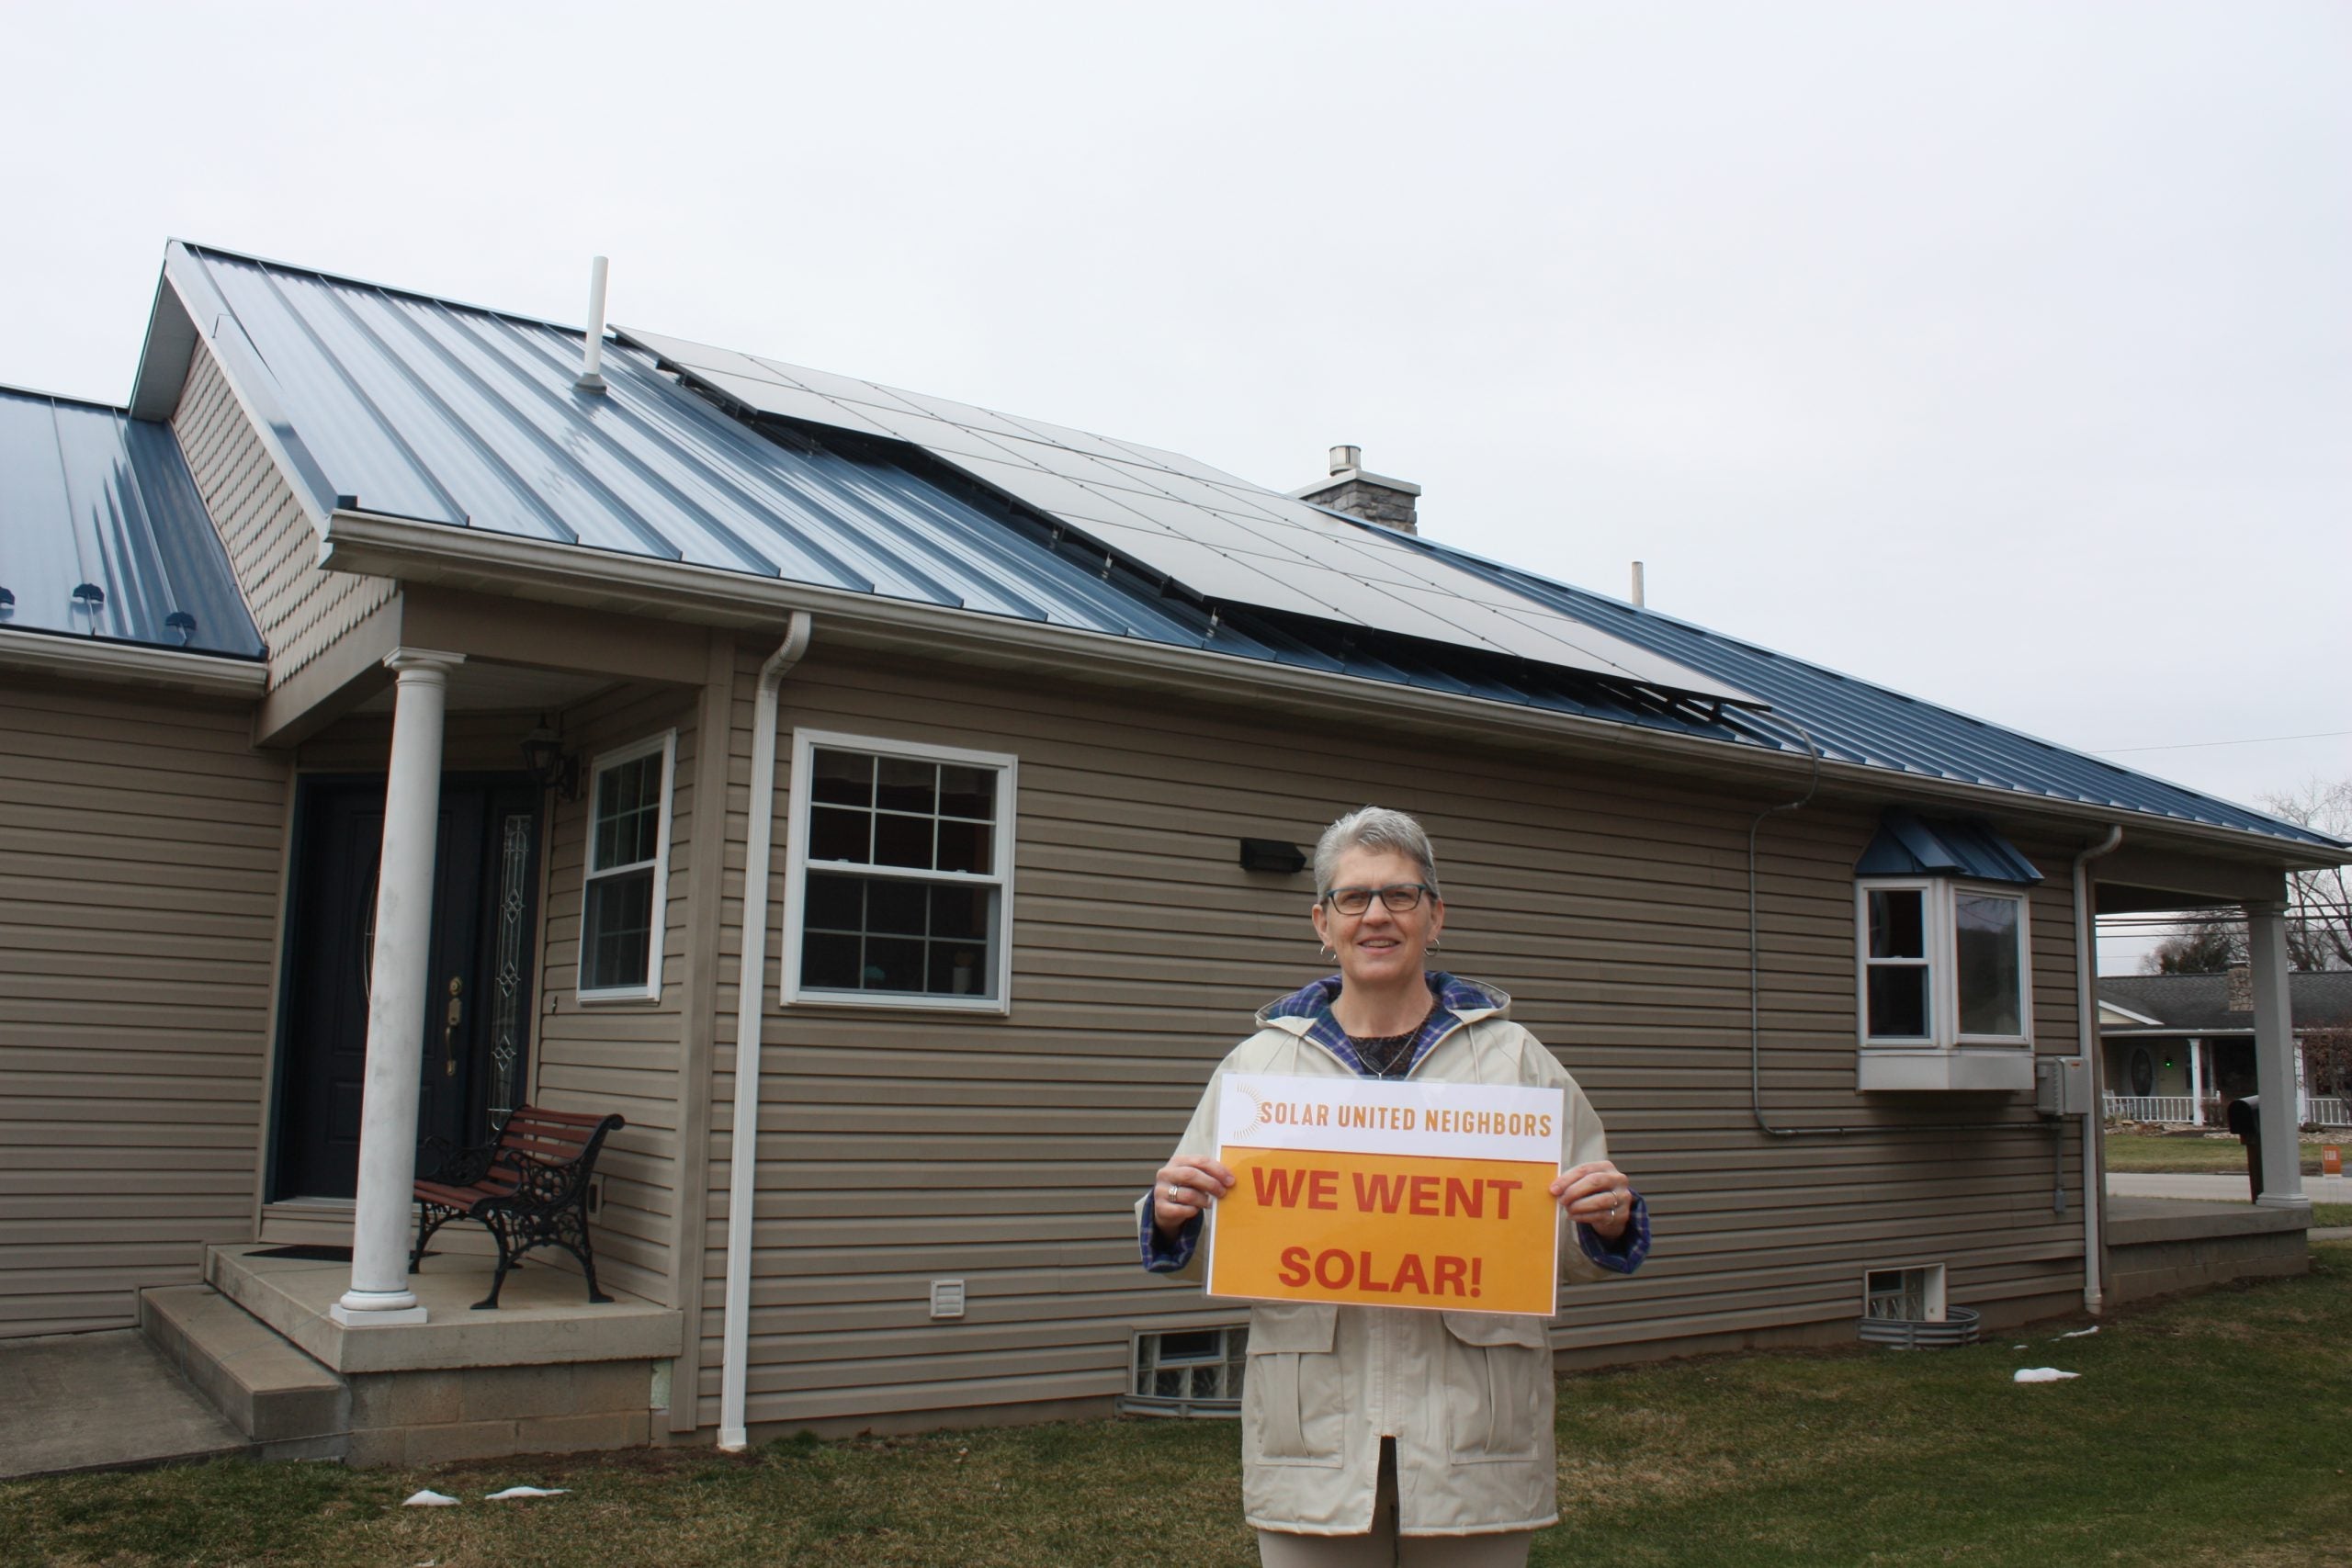 Woman holding a sign that says "we went solar" in front of her home and solar installation